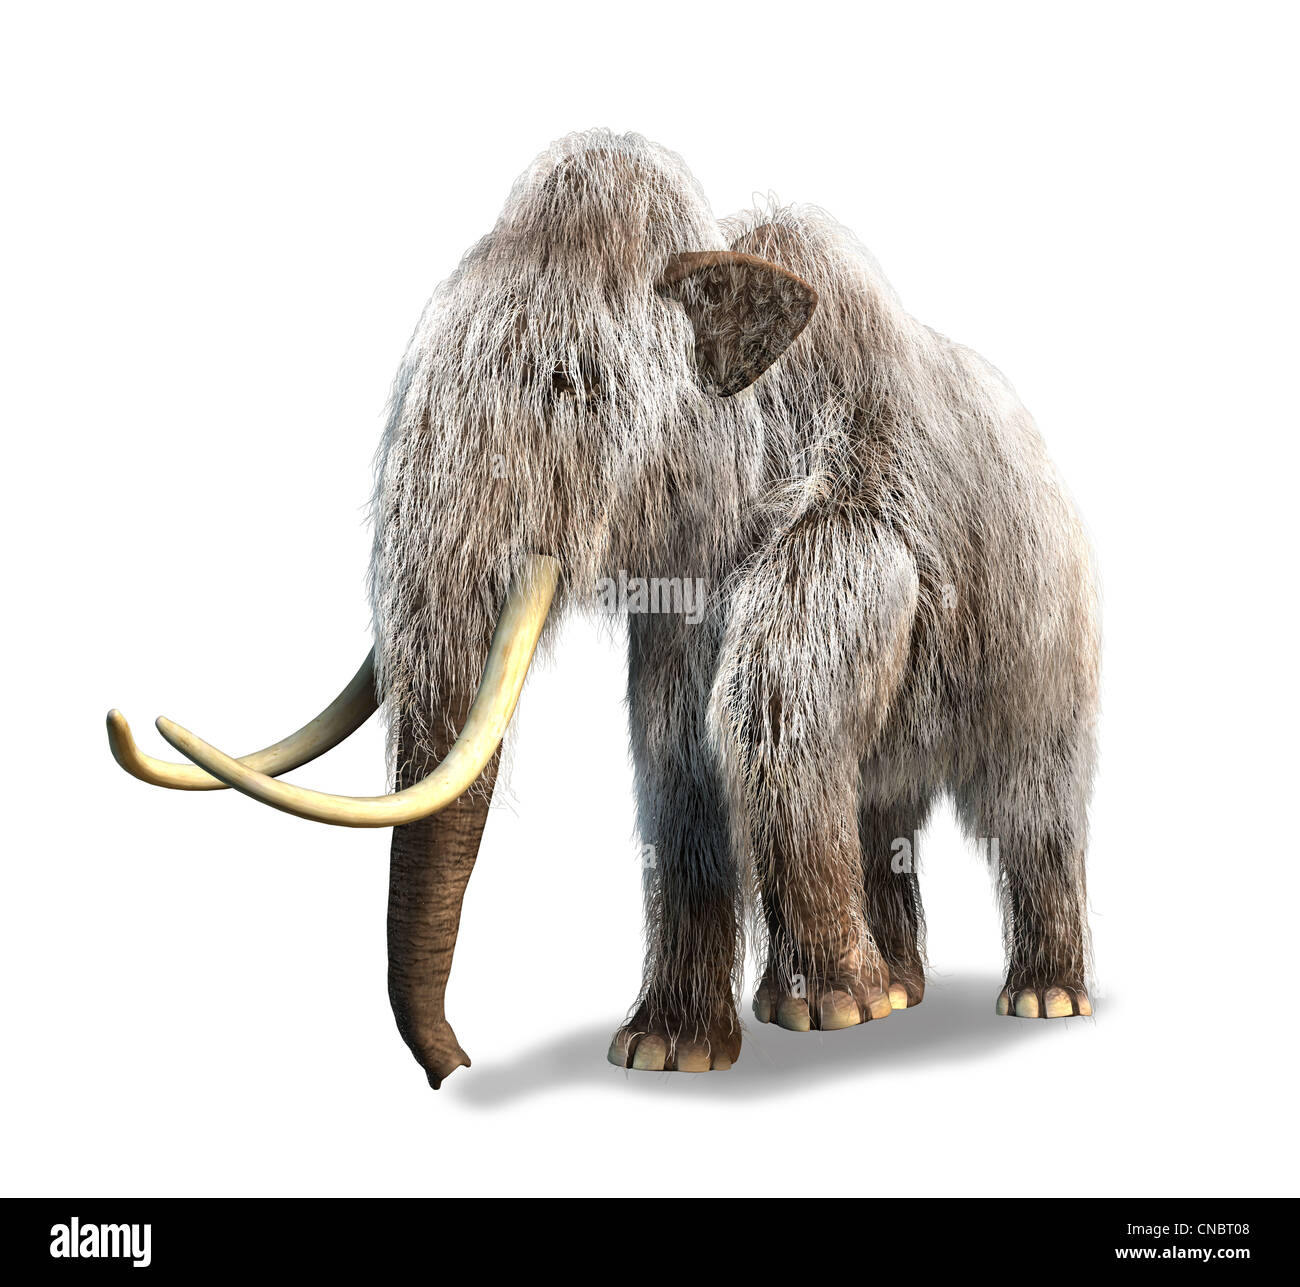 Photorealistic 3 D rendering of a Mammoth. On white background with drop shadow and clipping path included. Stock Photo